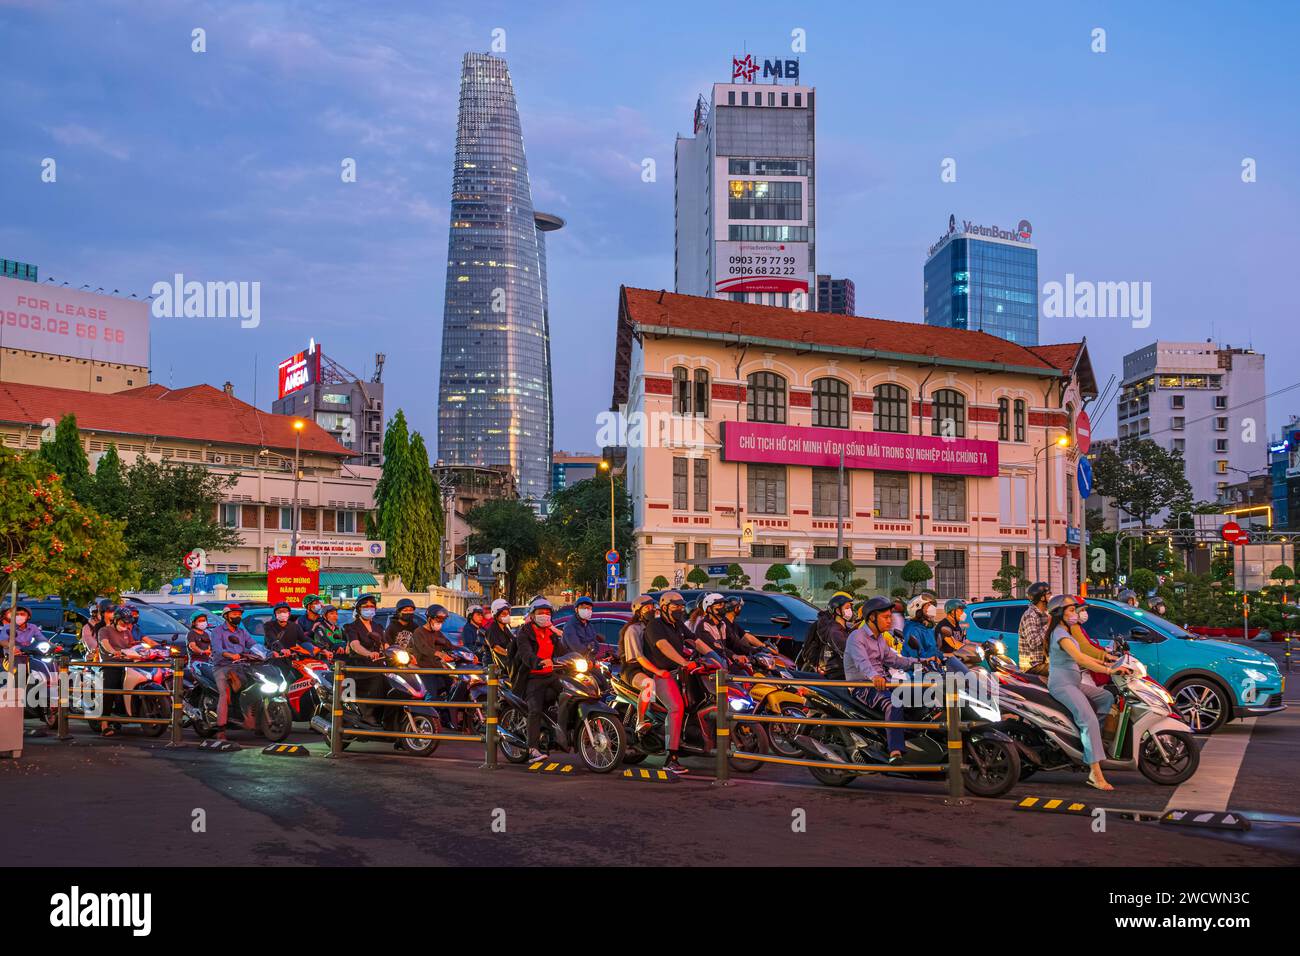 Vietnam, Ho Chi Minh City (Saigon), District 1, Ben Thanh area, Bitexco tower in the background Stock Photo